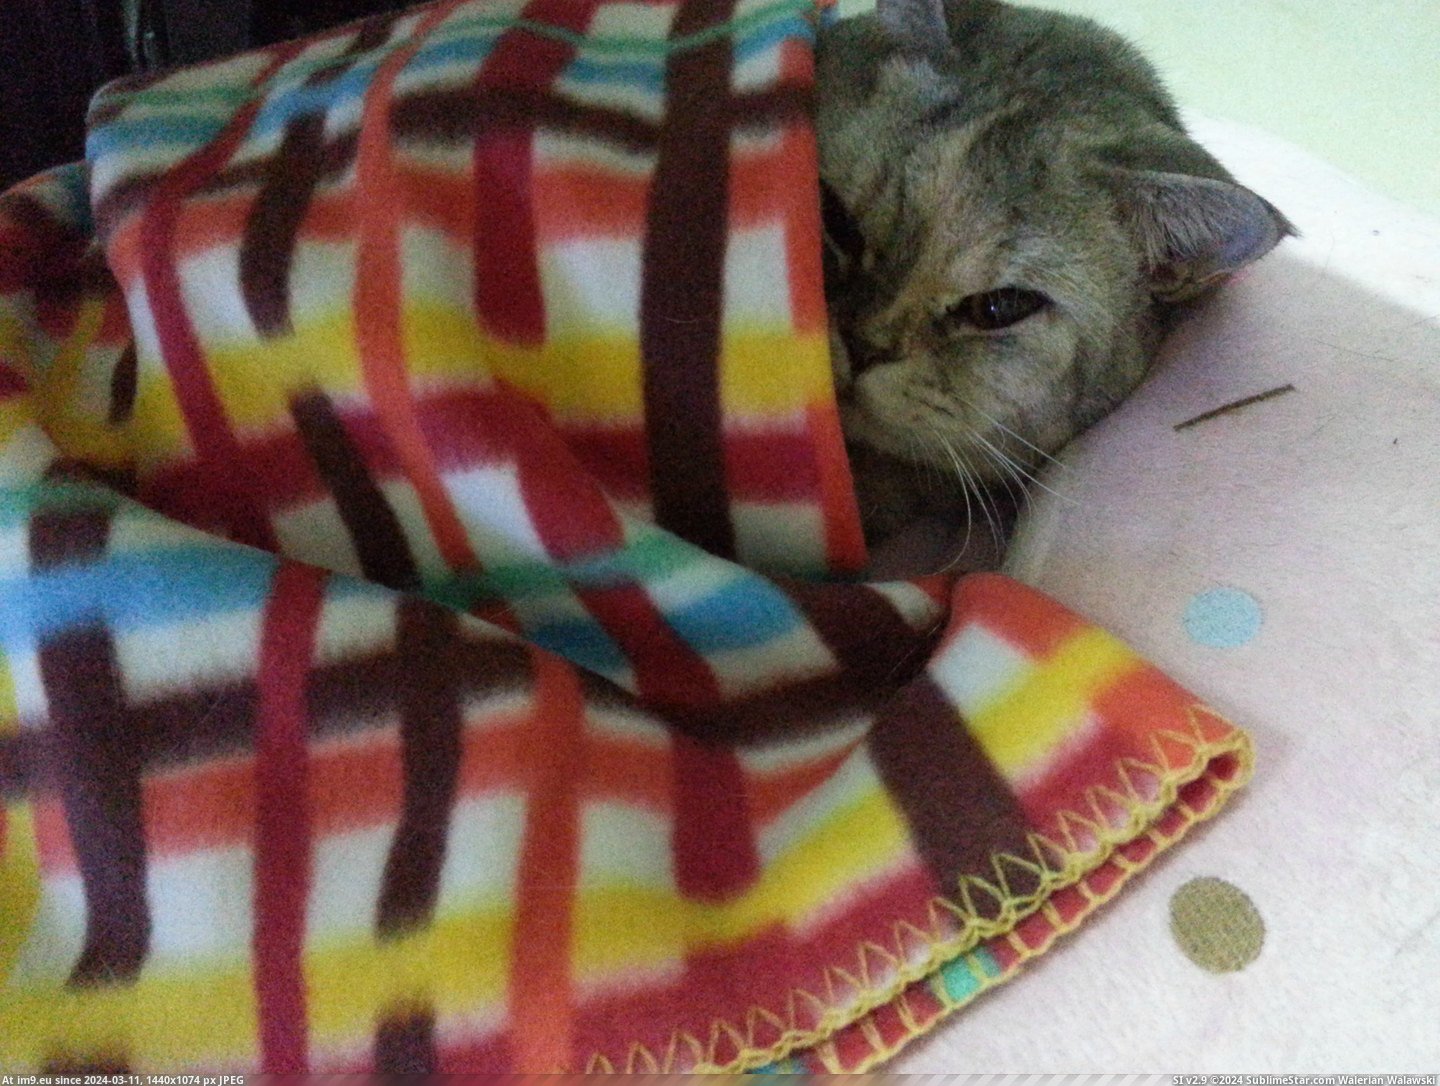 #Cats #Got #Weather #Blanket #Hated #She #Cold [Cats] She hated cold weather so we got her a little blanket 1 Pic. (Bild von album My r/CATS favs))